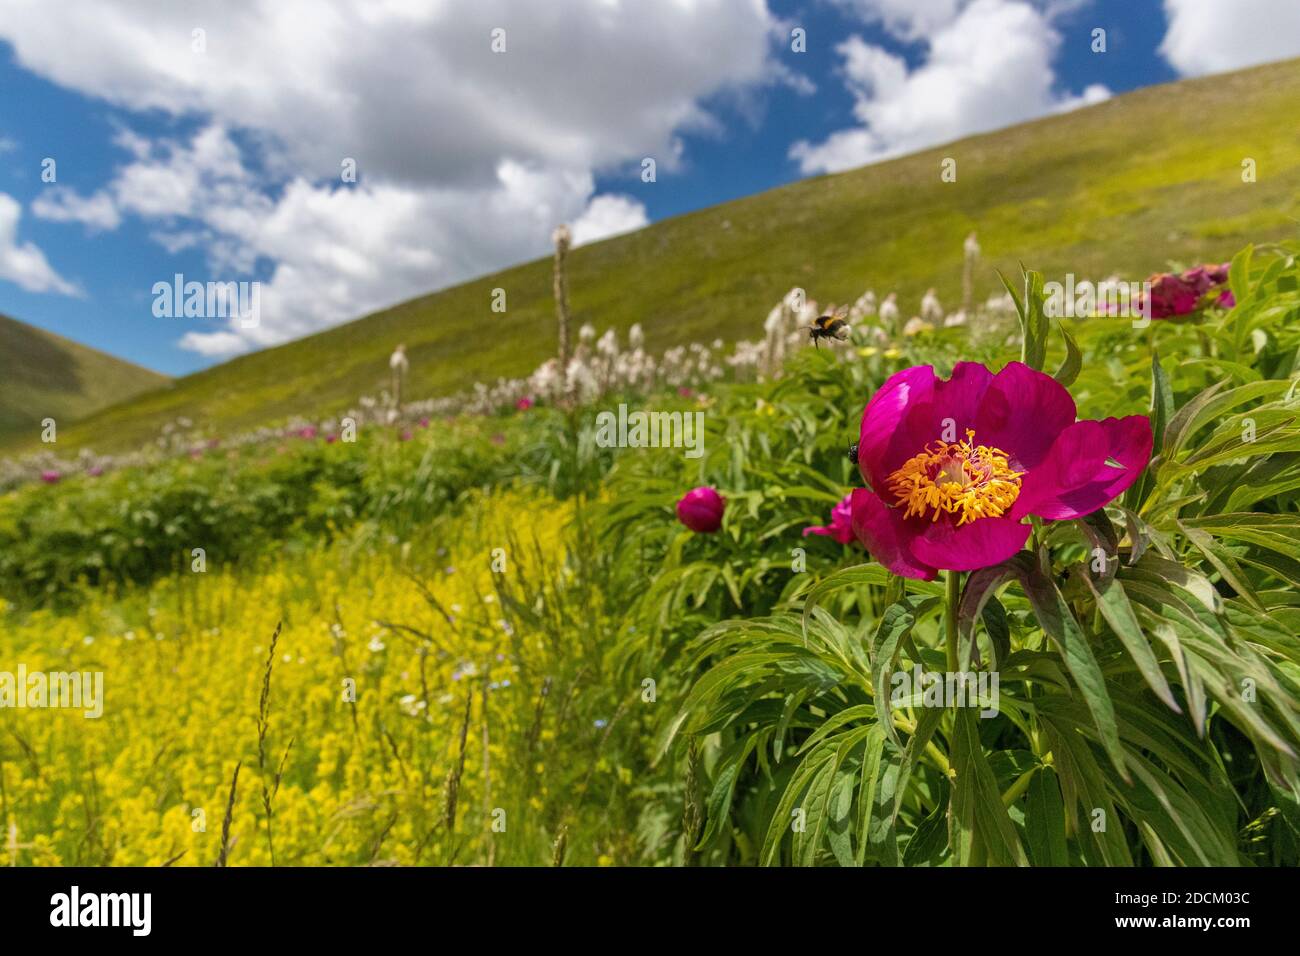 Common Peony (Paeonia officinalis), flower on the foreground with a mountain slope and clouds on the background, Abruzzo, Italy Stock Photo